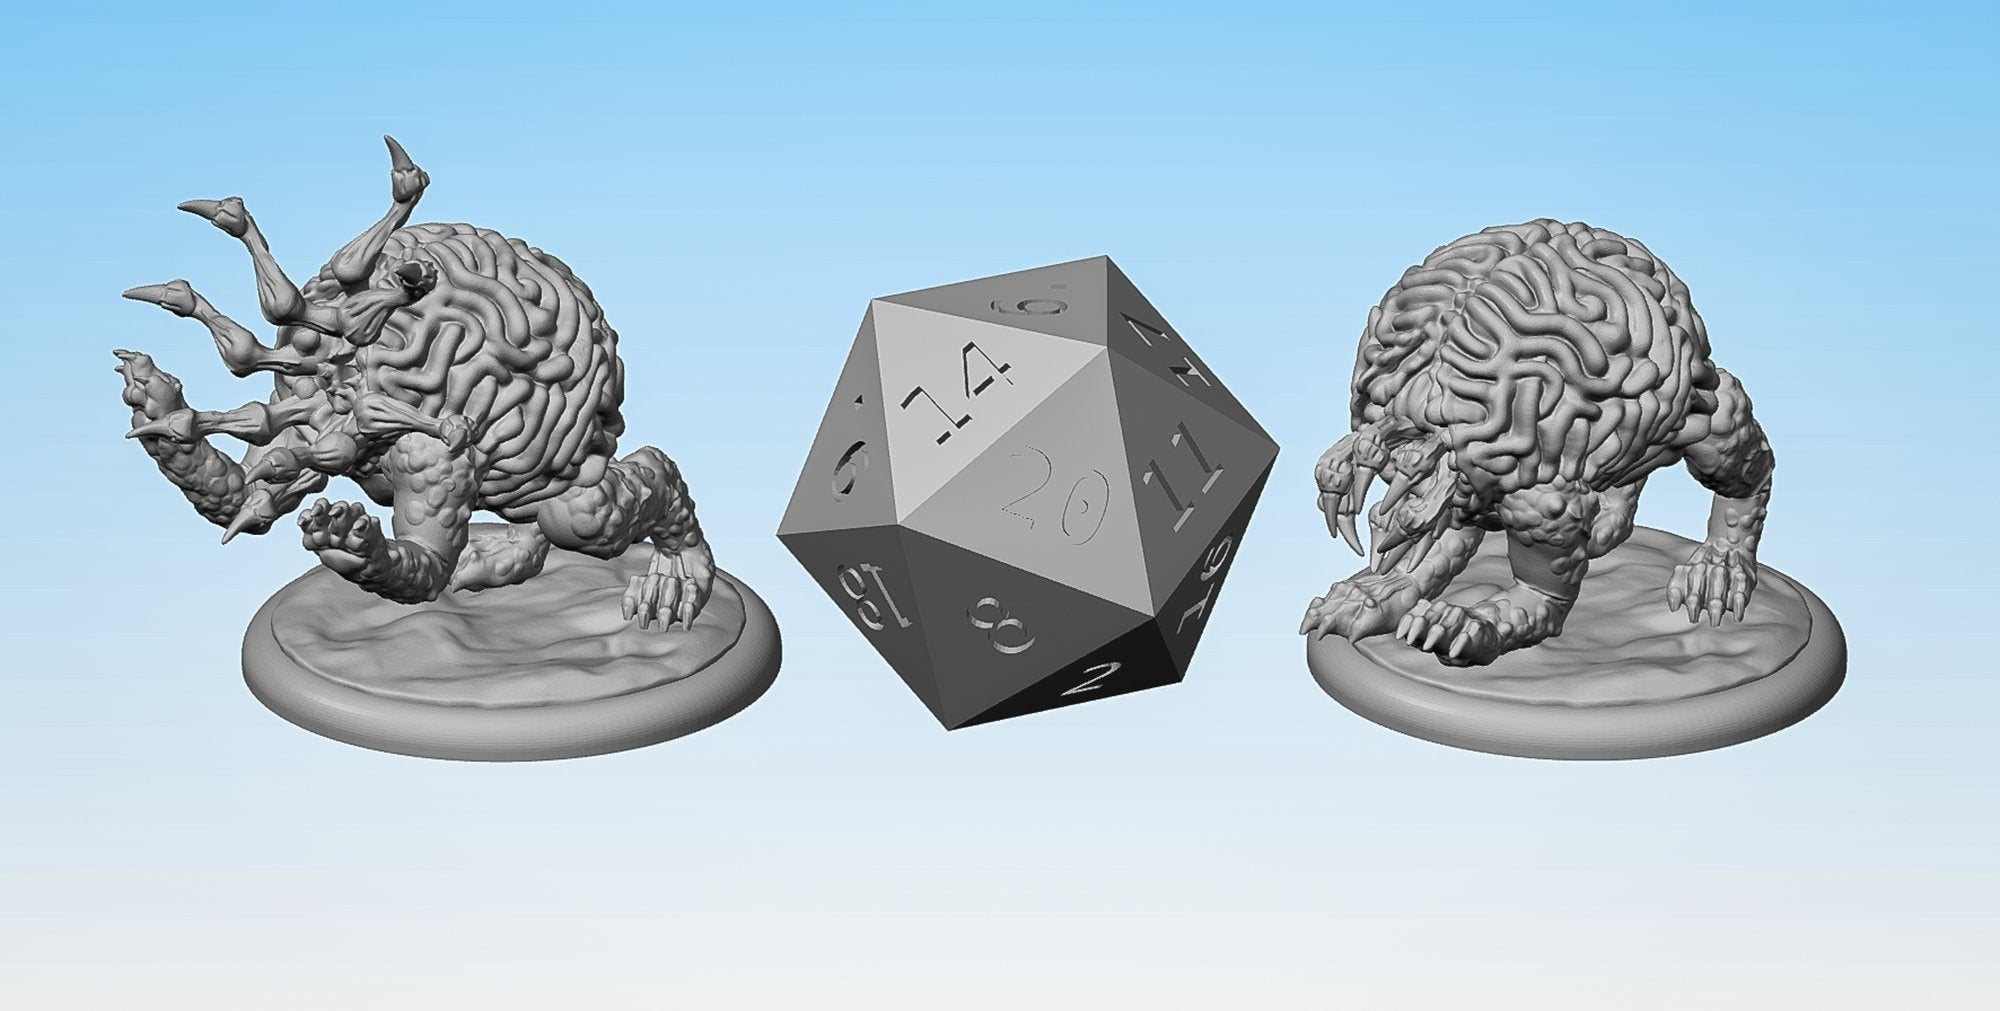 INTELLECT DEVOURER (Ver. 2), 2 for 1 | 3D Print Mini | Resin-Role Playing Miniatures